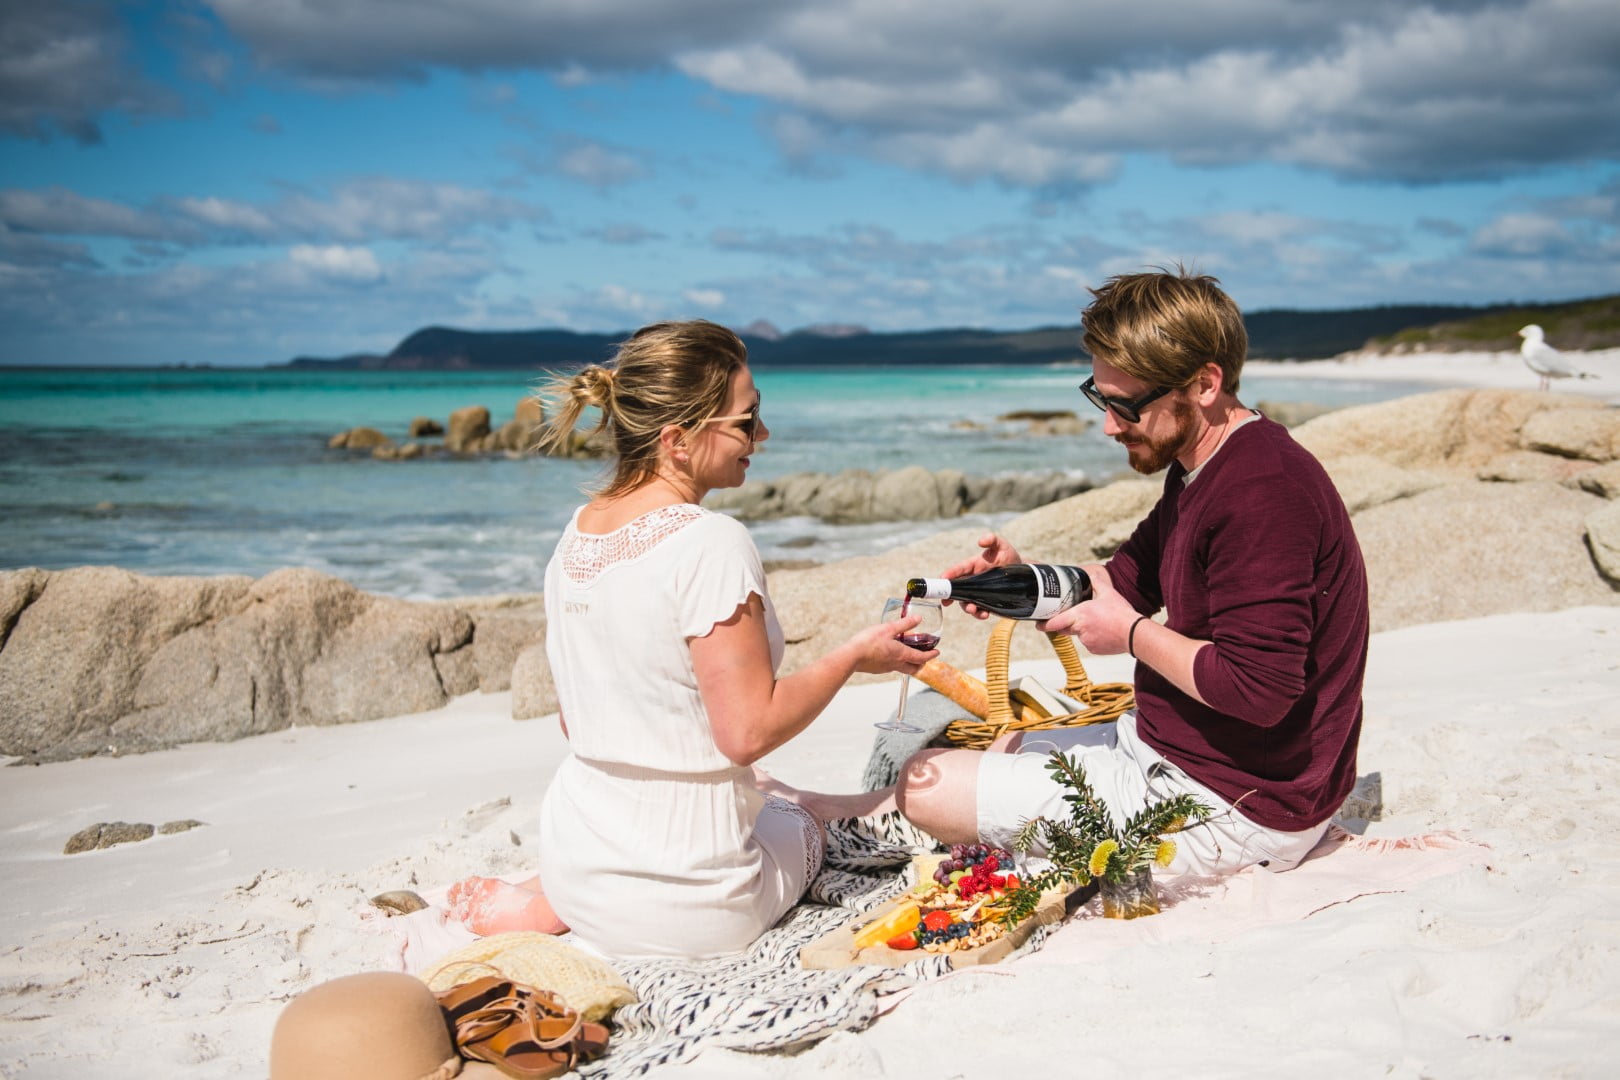 Picnicing on the beach, 2 tourists sharing wine on a sandy beach while on a Luxury Bespoke Private tour